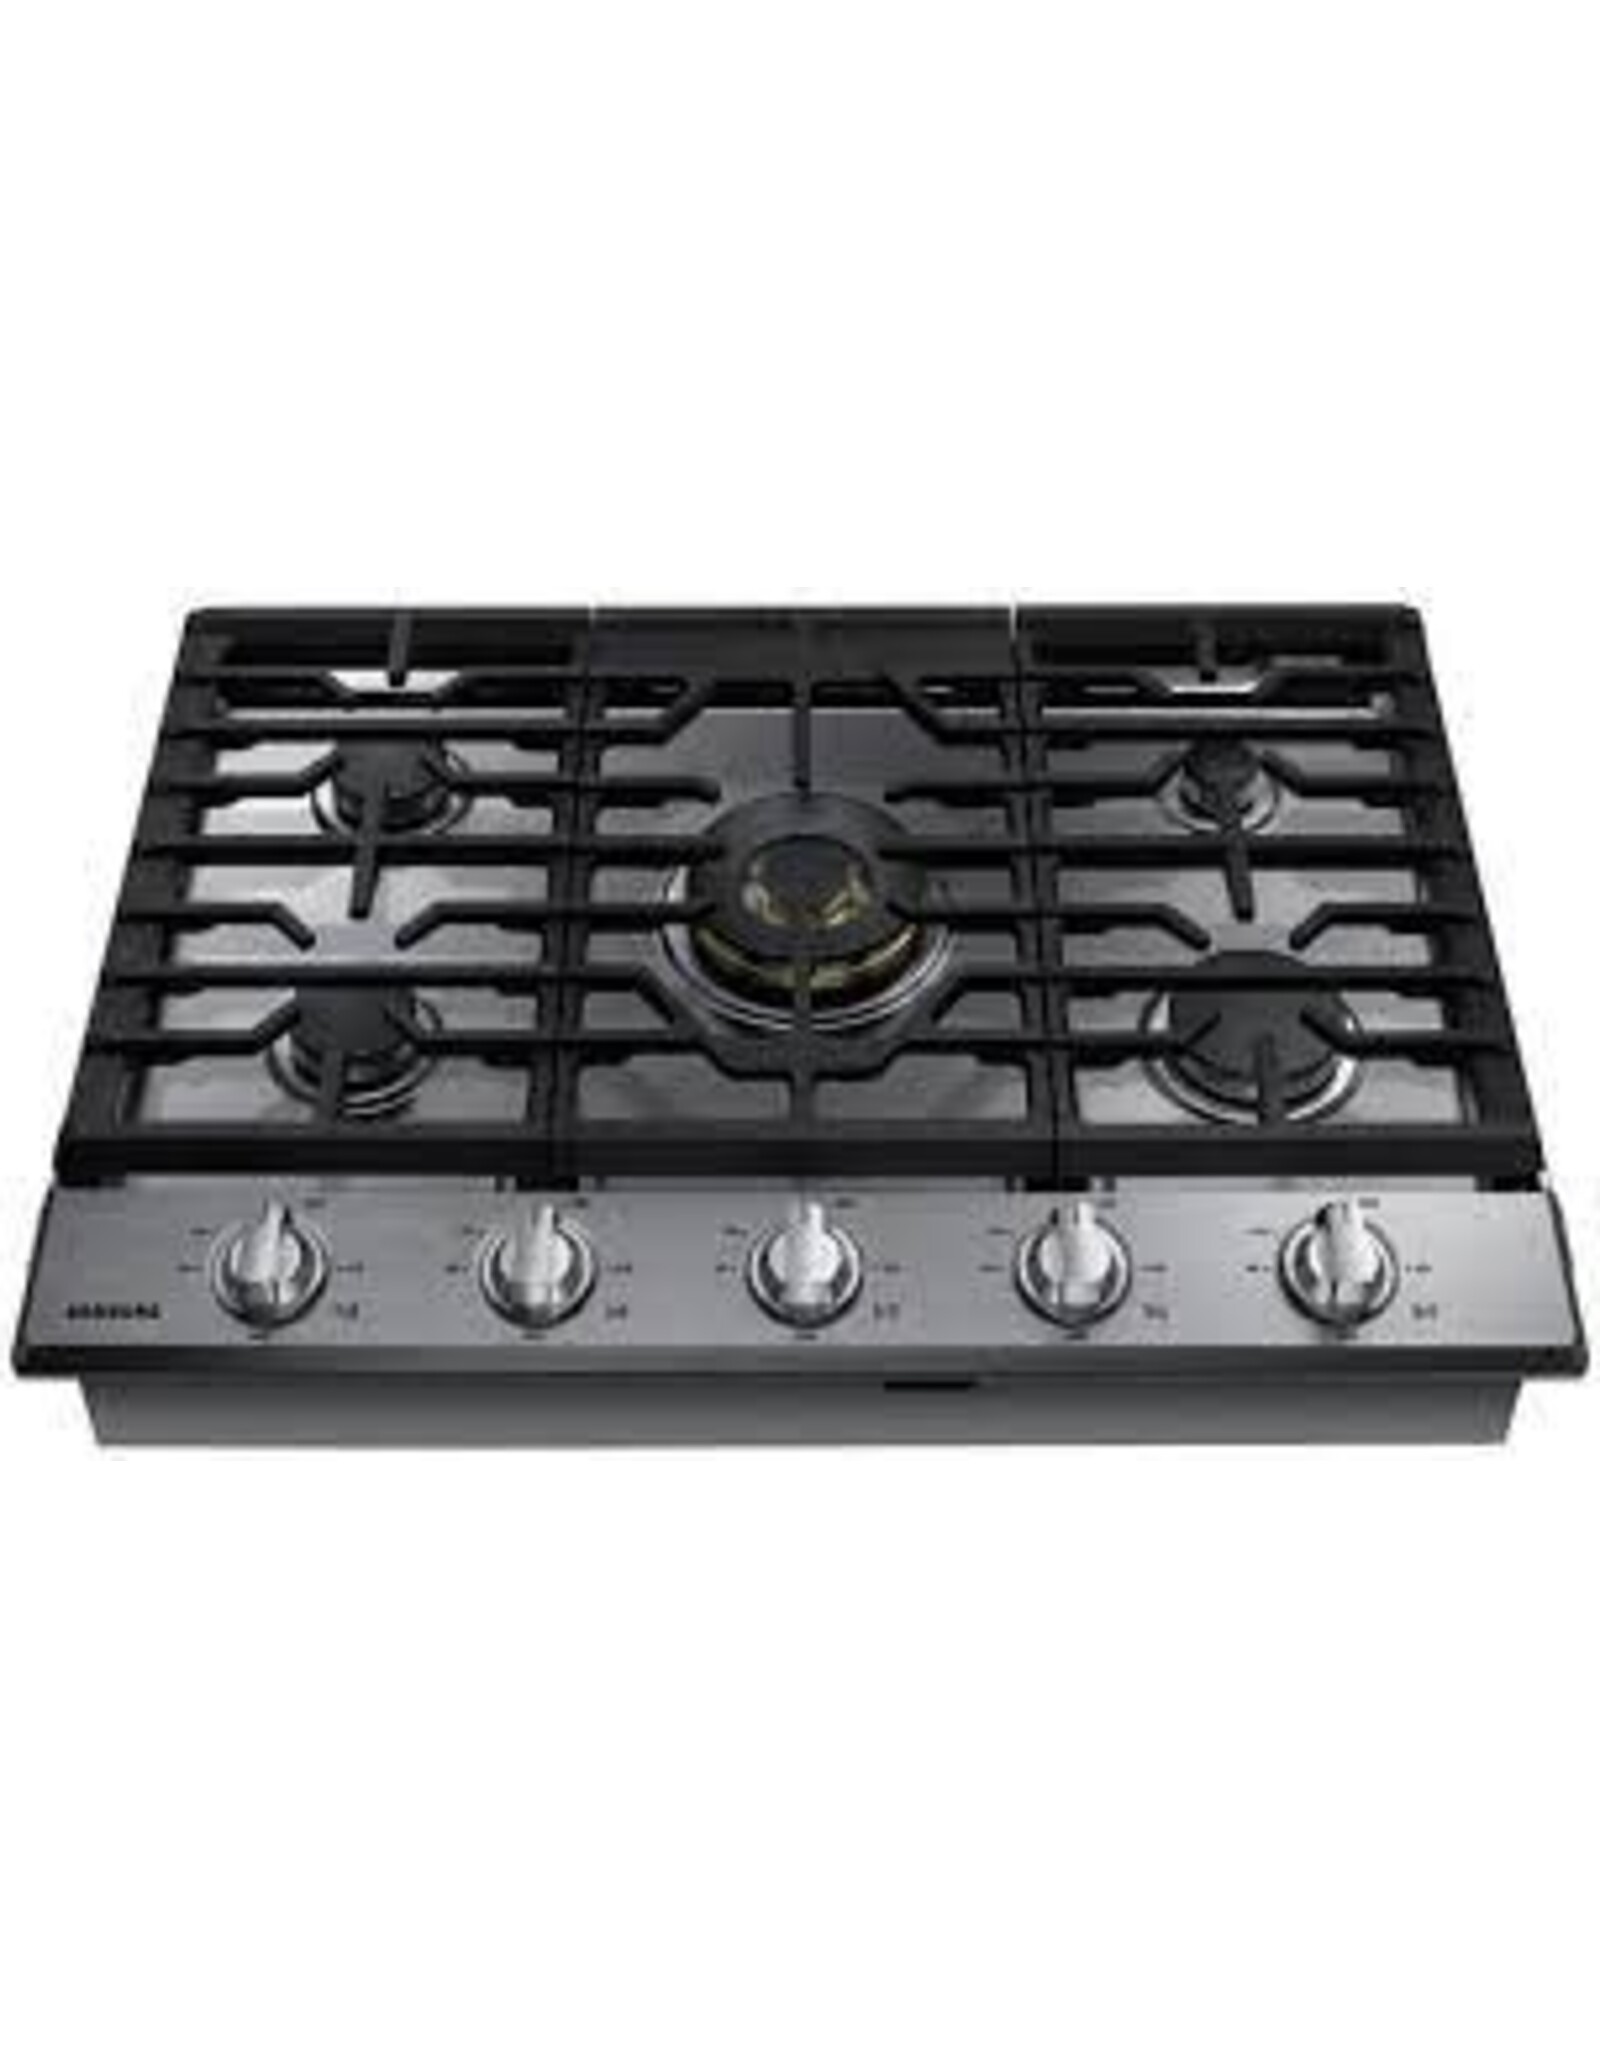 SAMSUNG Samsung 36 in. Gas Cooktop in Stainless with 5 Burners including Dual Brass Power Burner with Wi-Fi